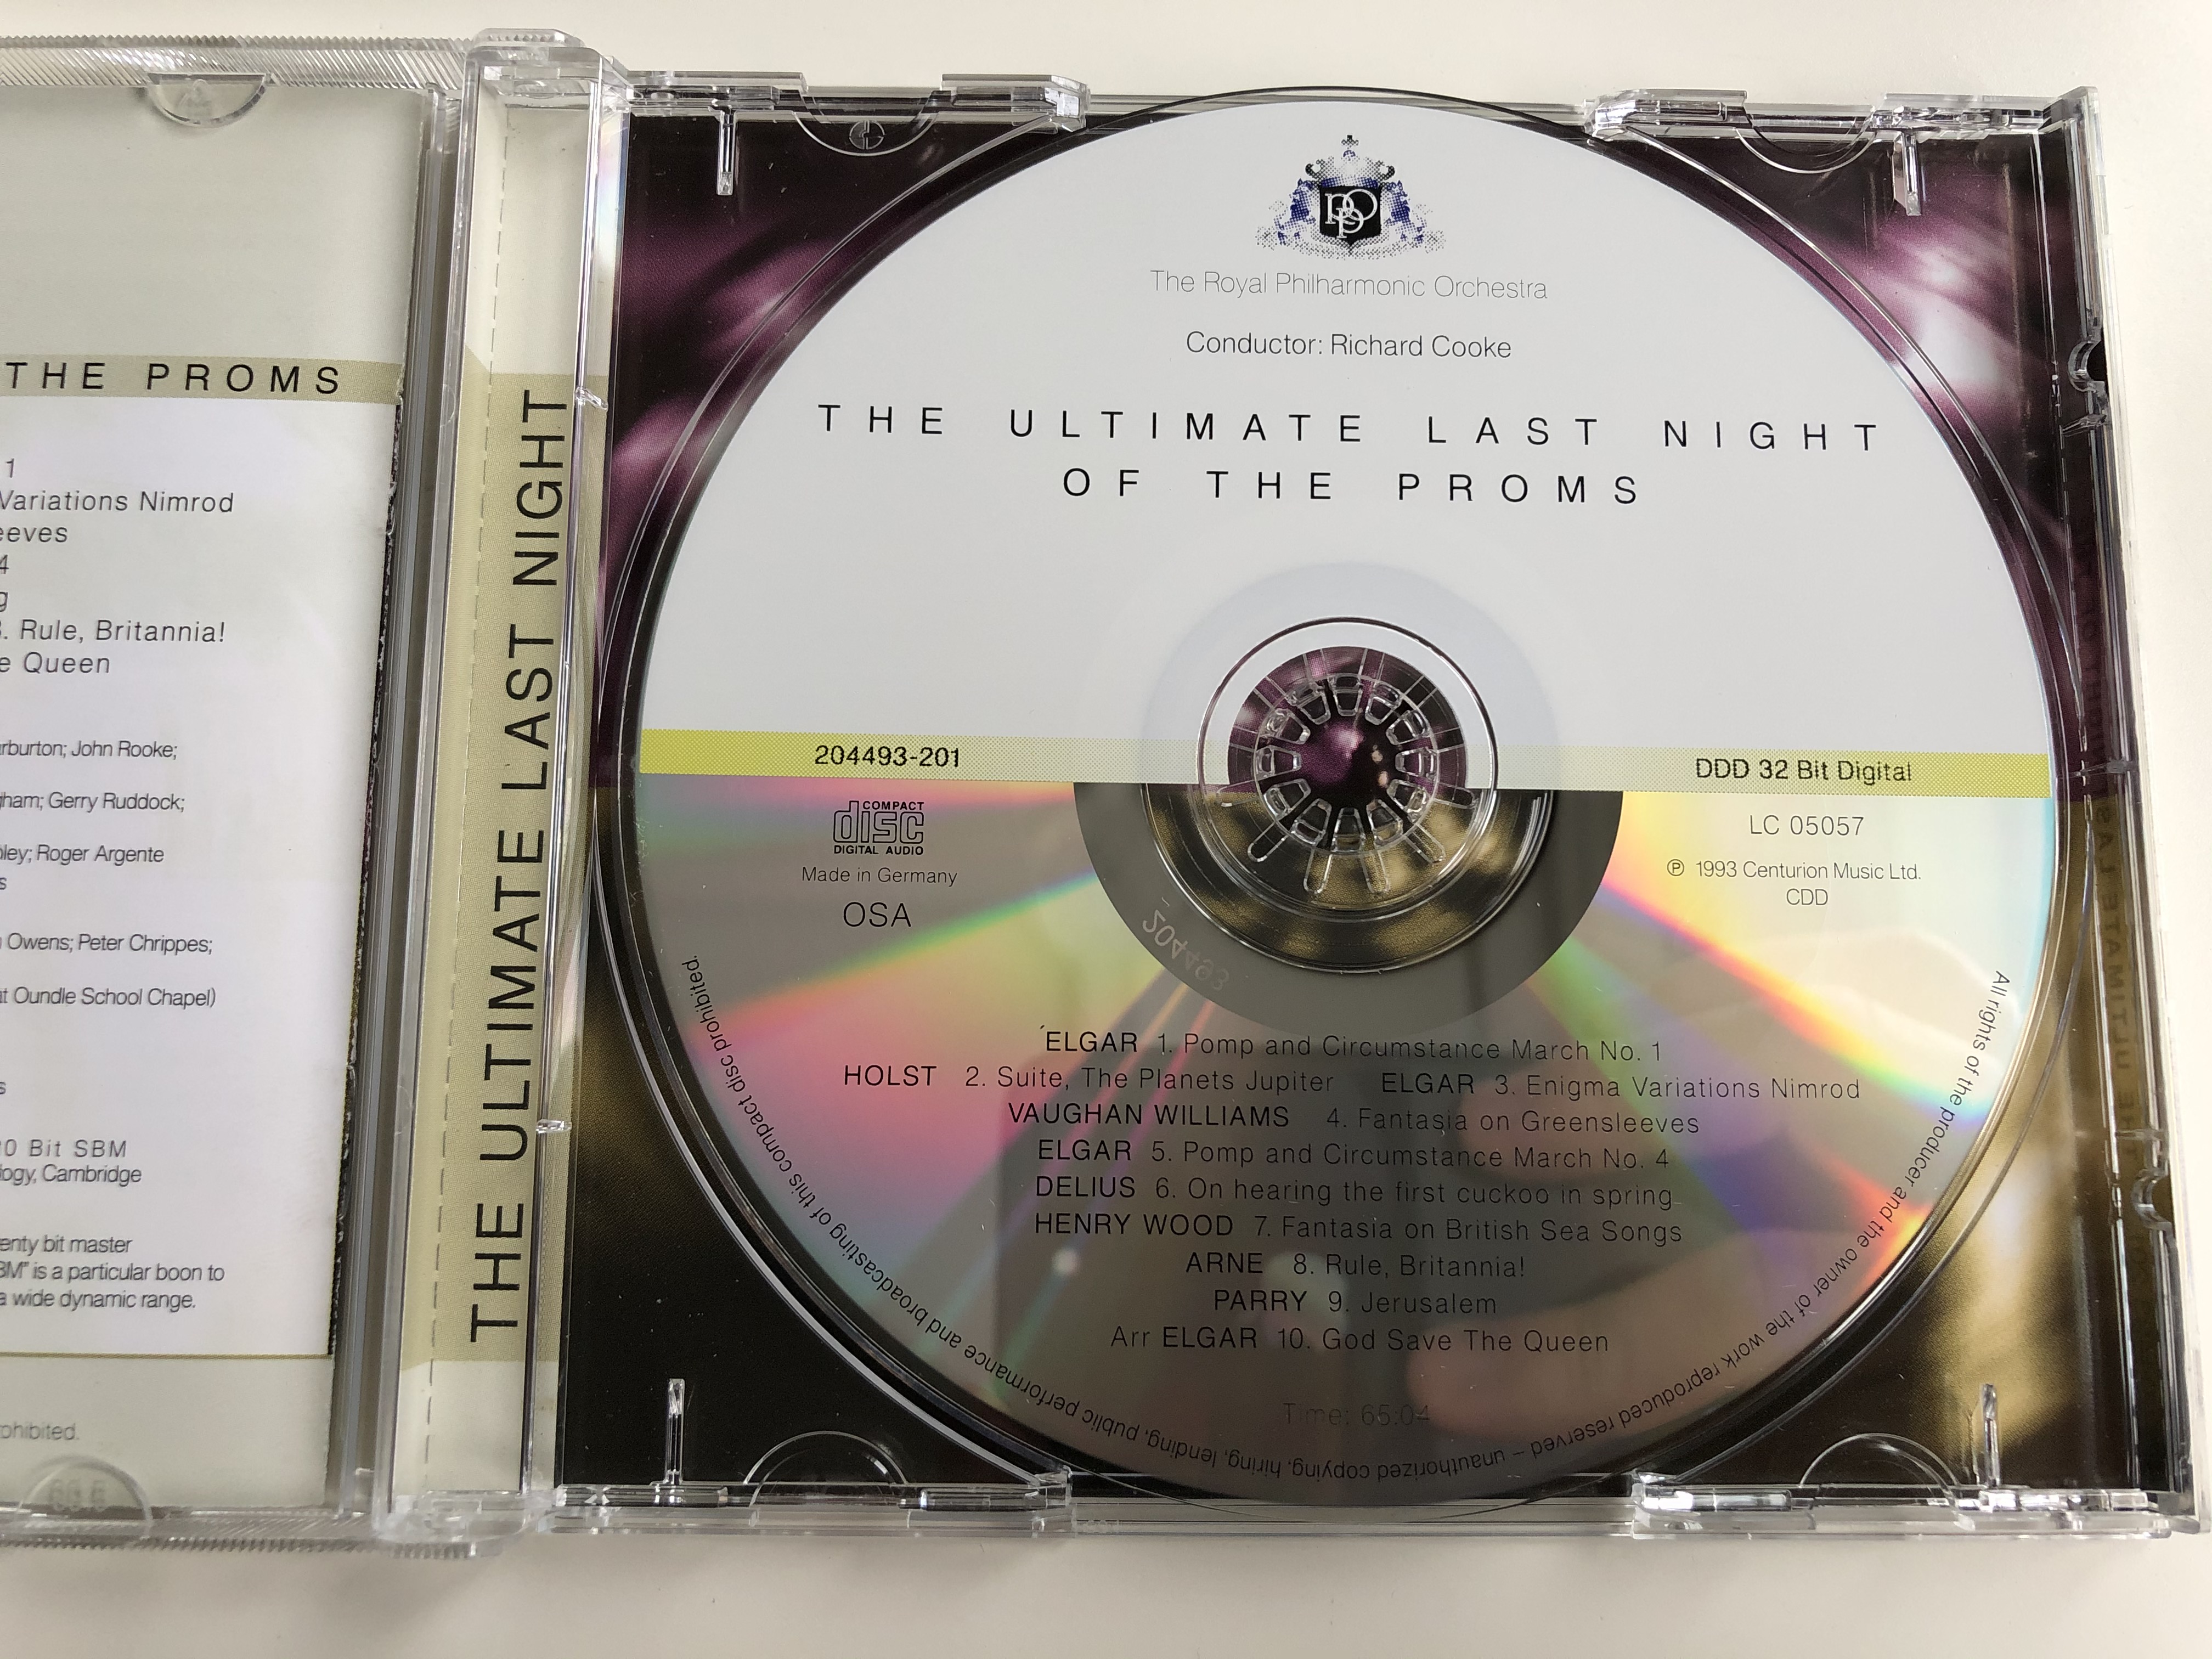 the-royal-philharmonic-orchestra-richard-cooke-the-ultimate-last-night-of-the-proms-holst-elgar-vaughan-williams-henry-wood-rpo-records-audio-cd-1993-204493-201-6-.jpg